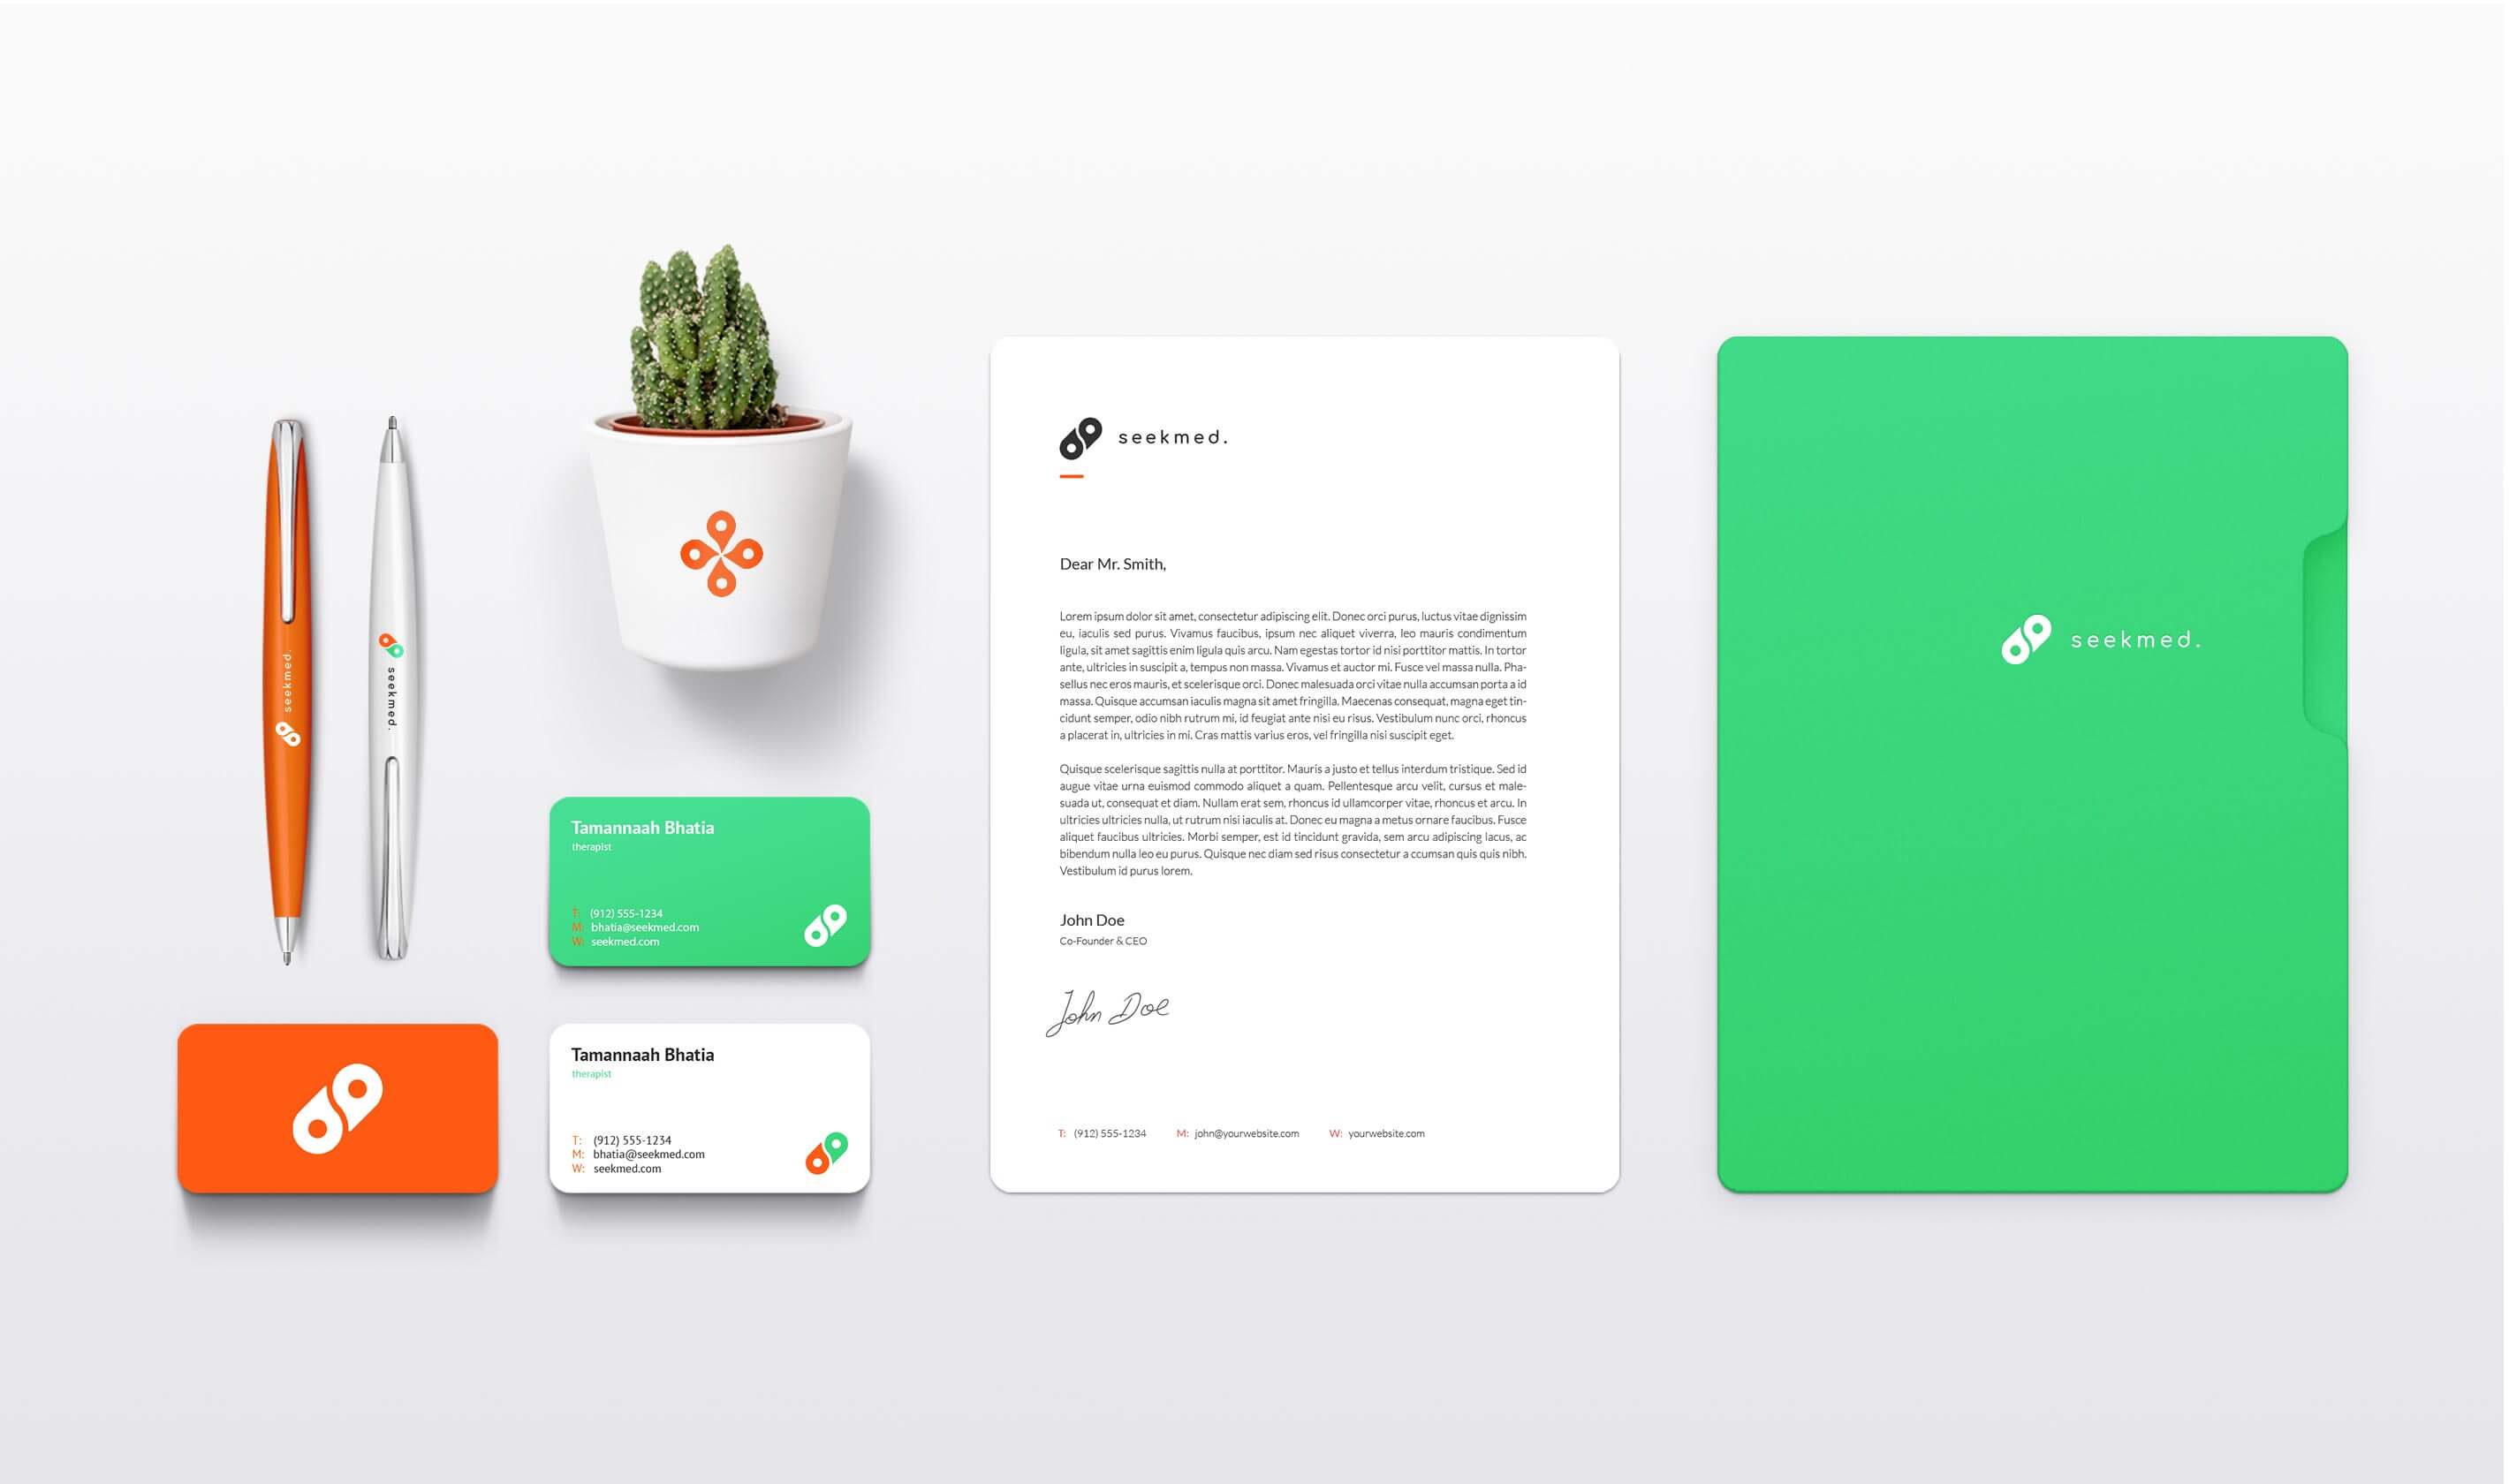 SeekMed corporate identity design by Omega Inc.